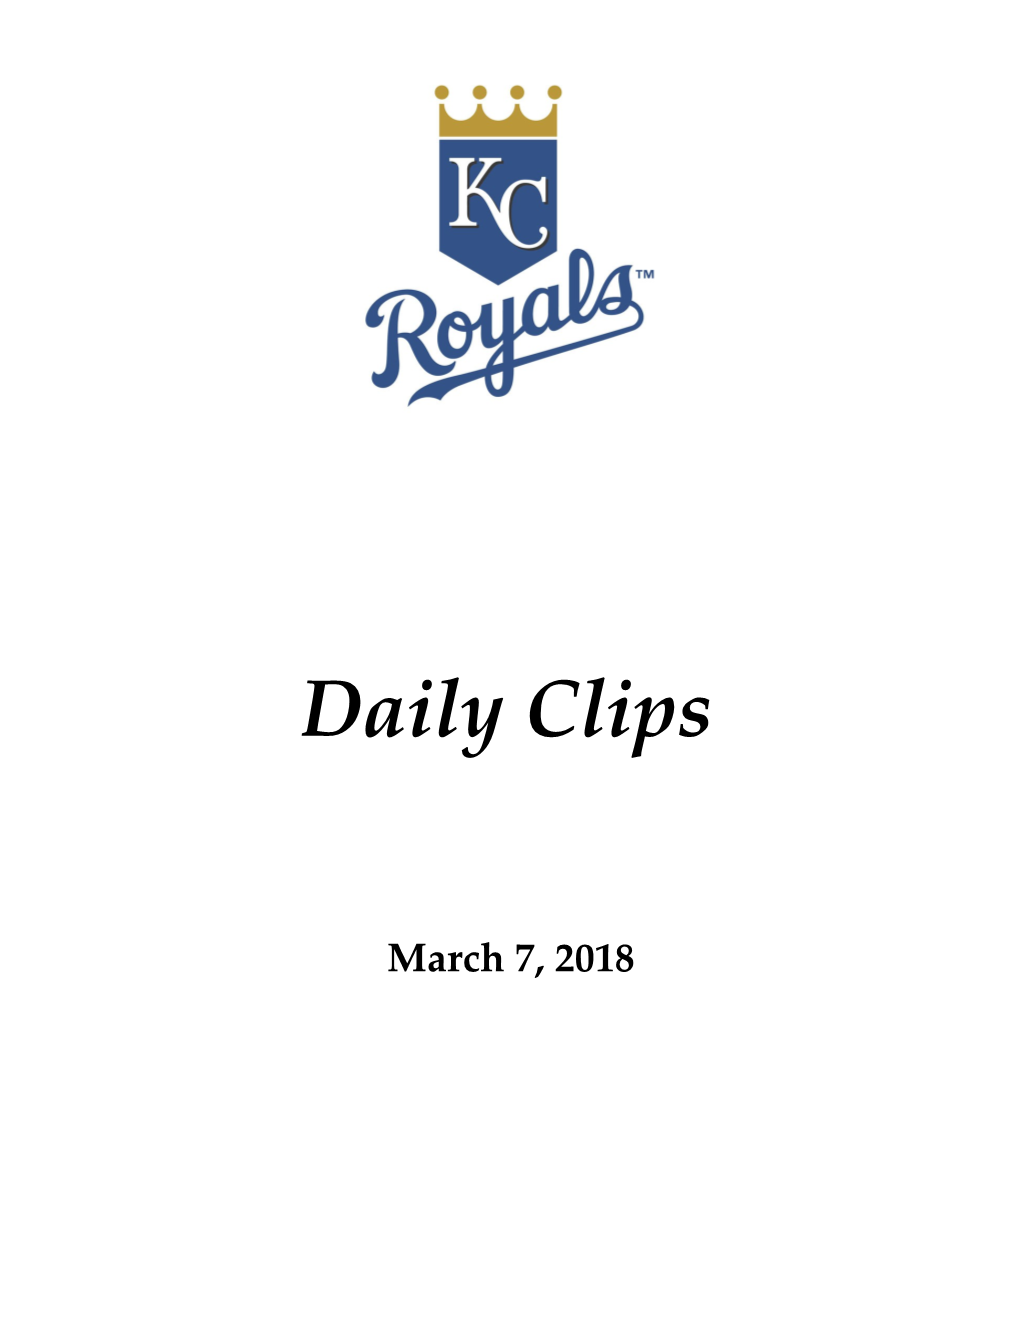 Royals Sign Lefty-Swinging Outfielder Jay